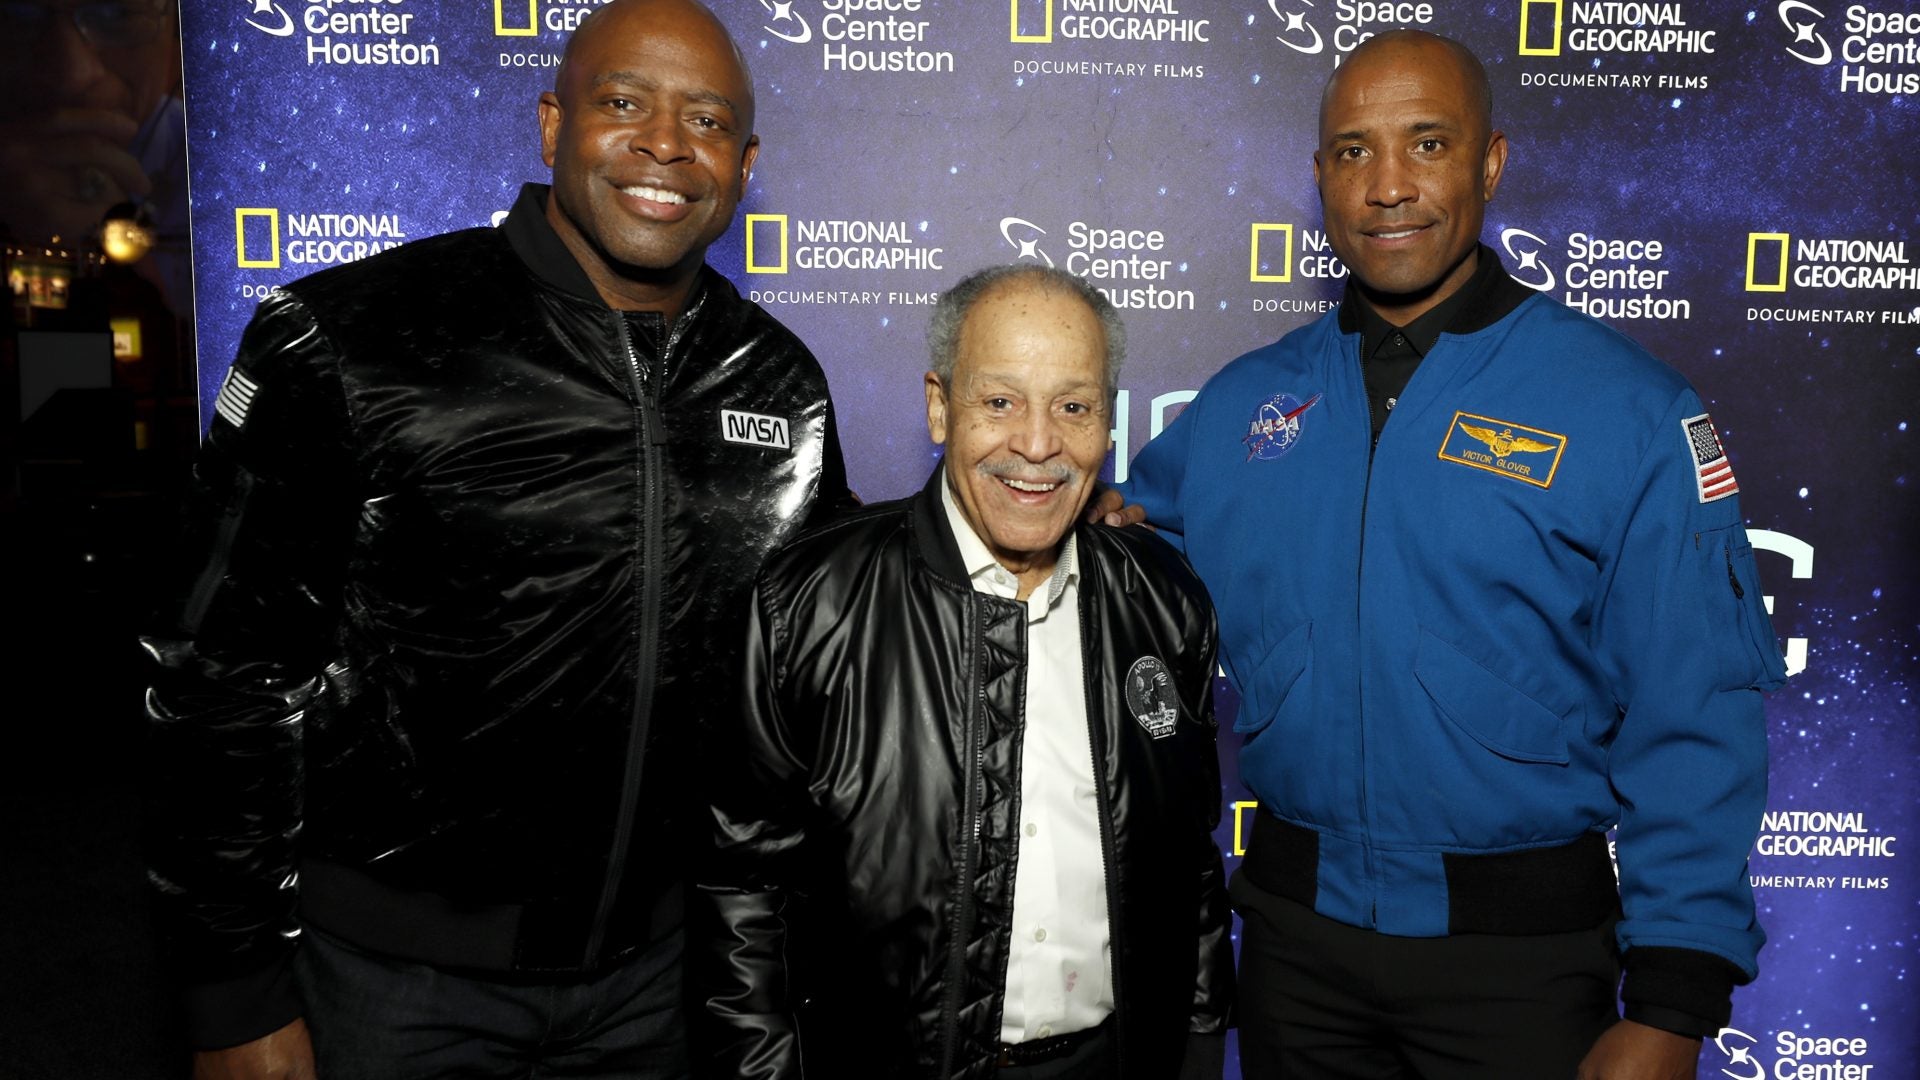 This Man Nearly Became The First Black Astronaut. He's Finally Getting His Recognition